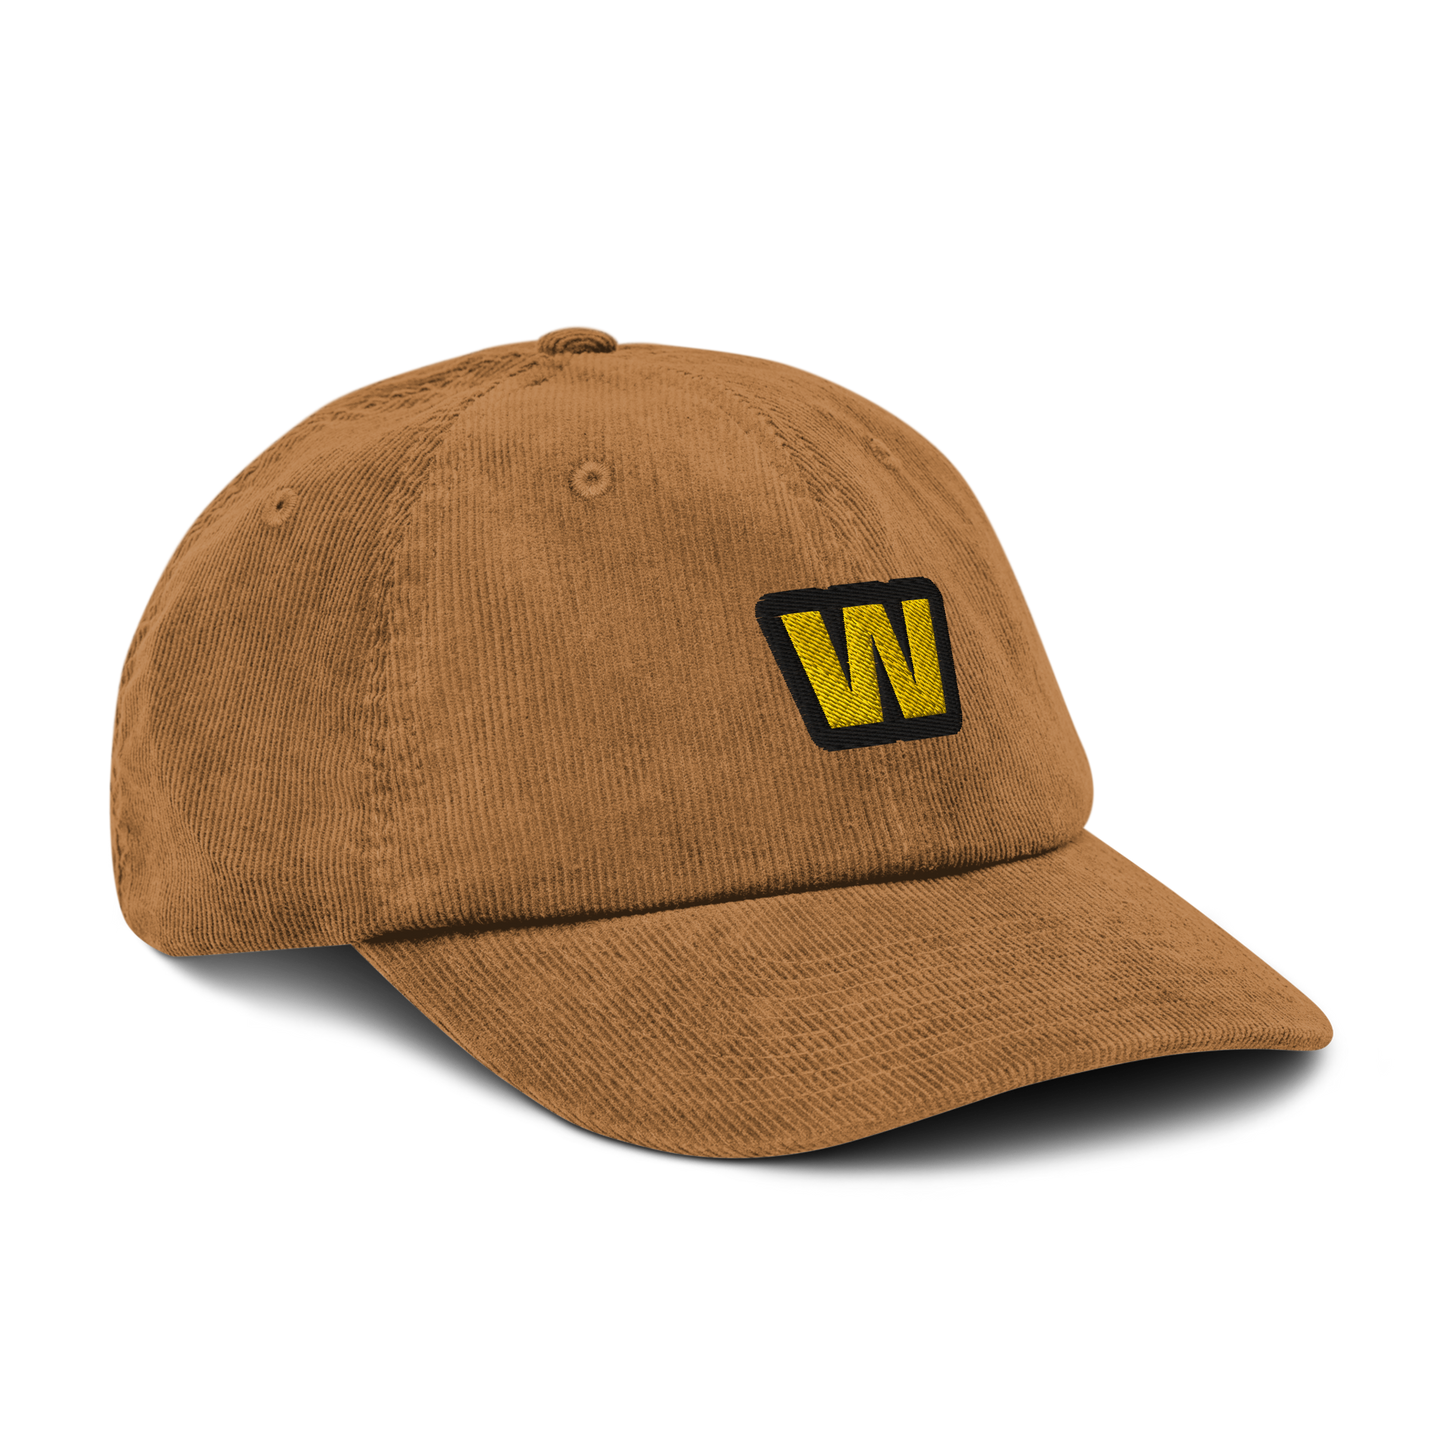 W - The letter collection - Corduroy hat